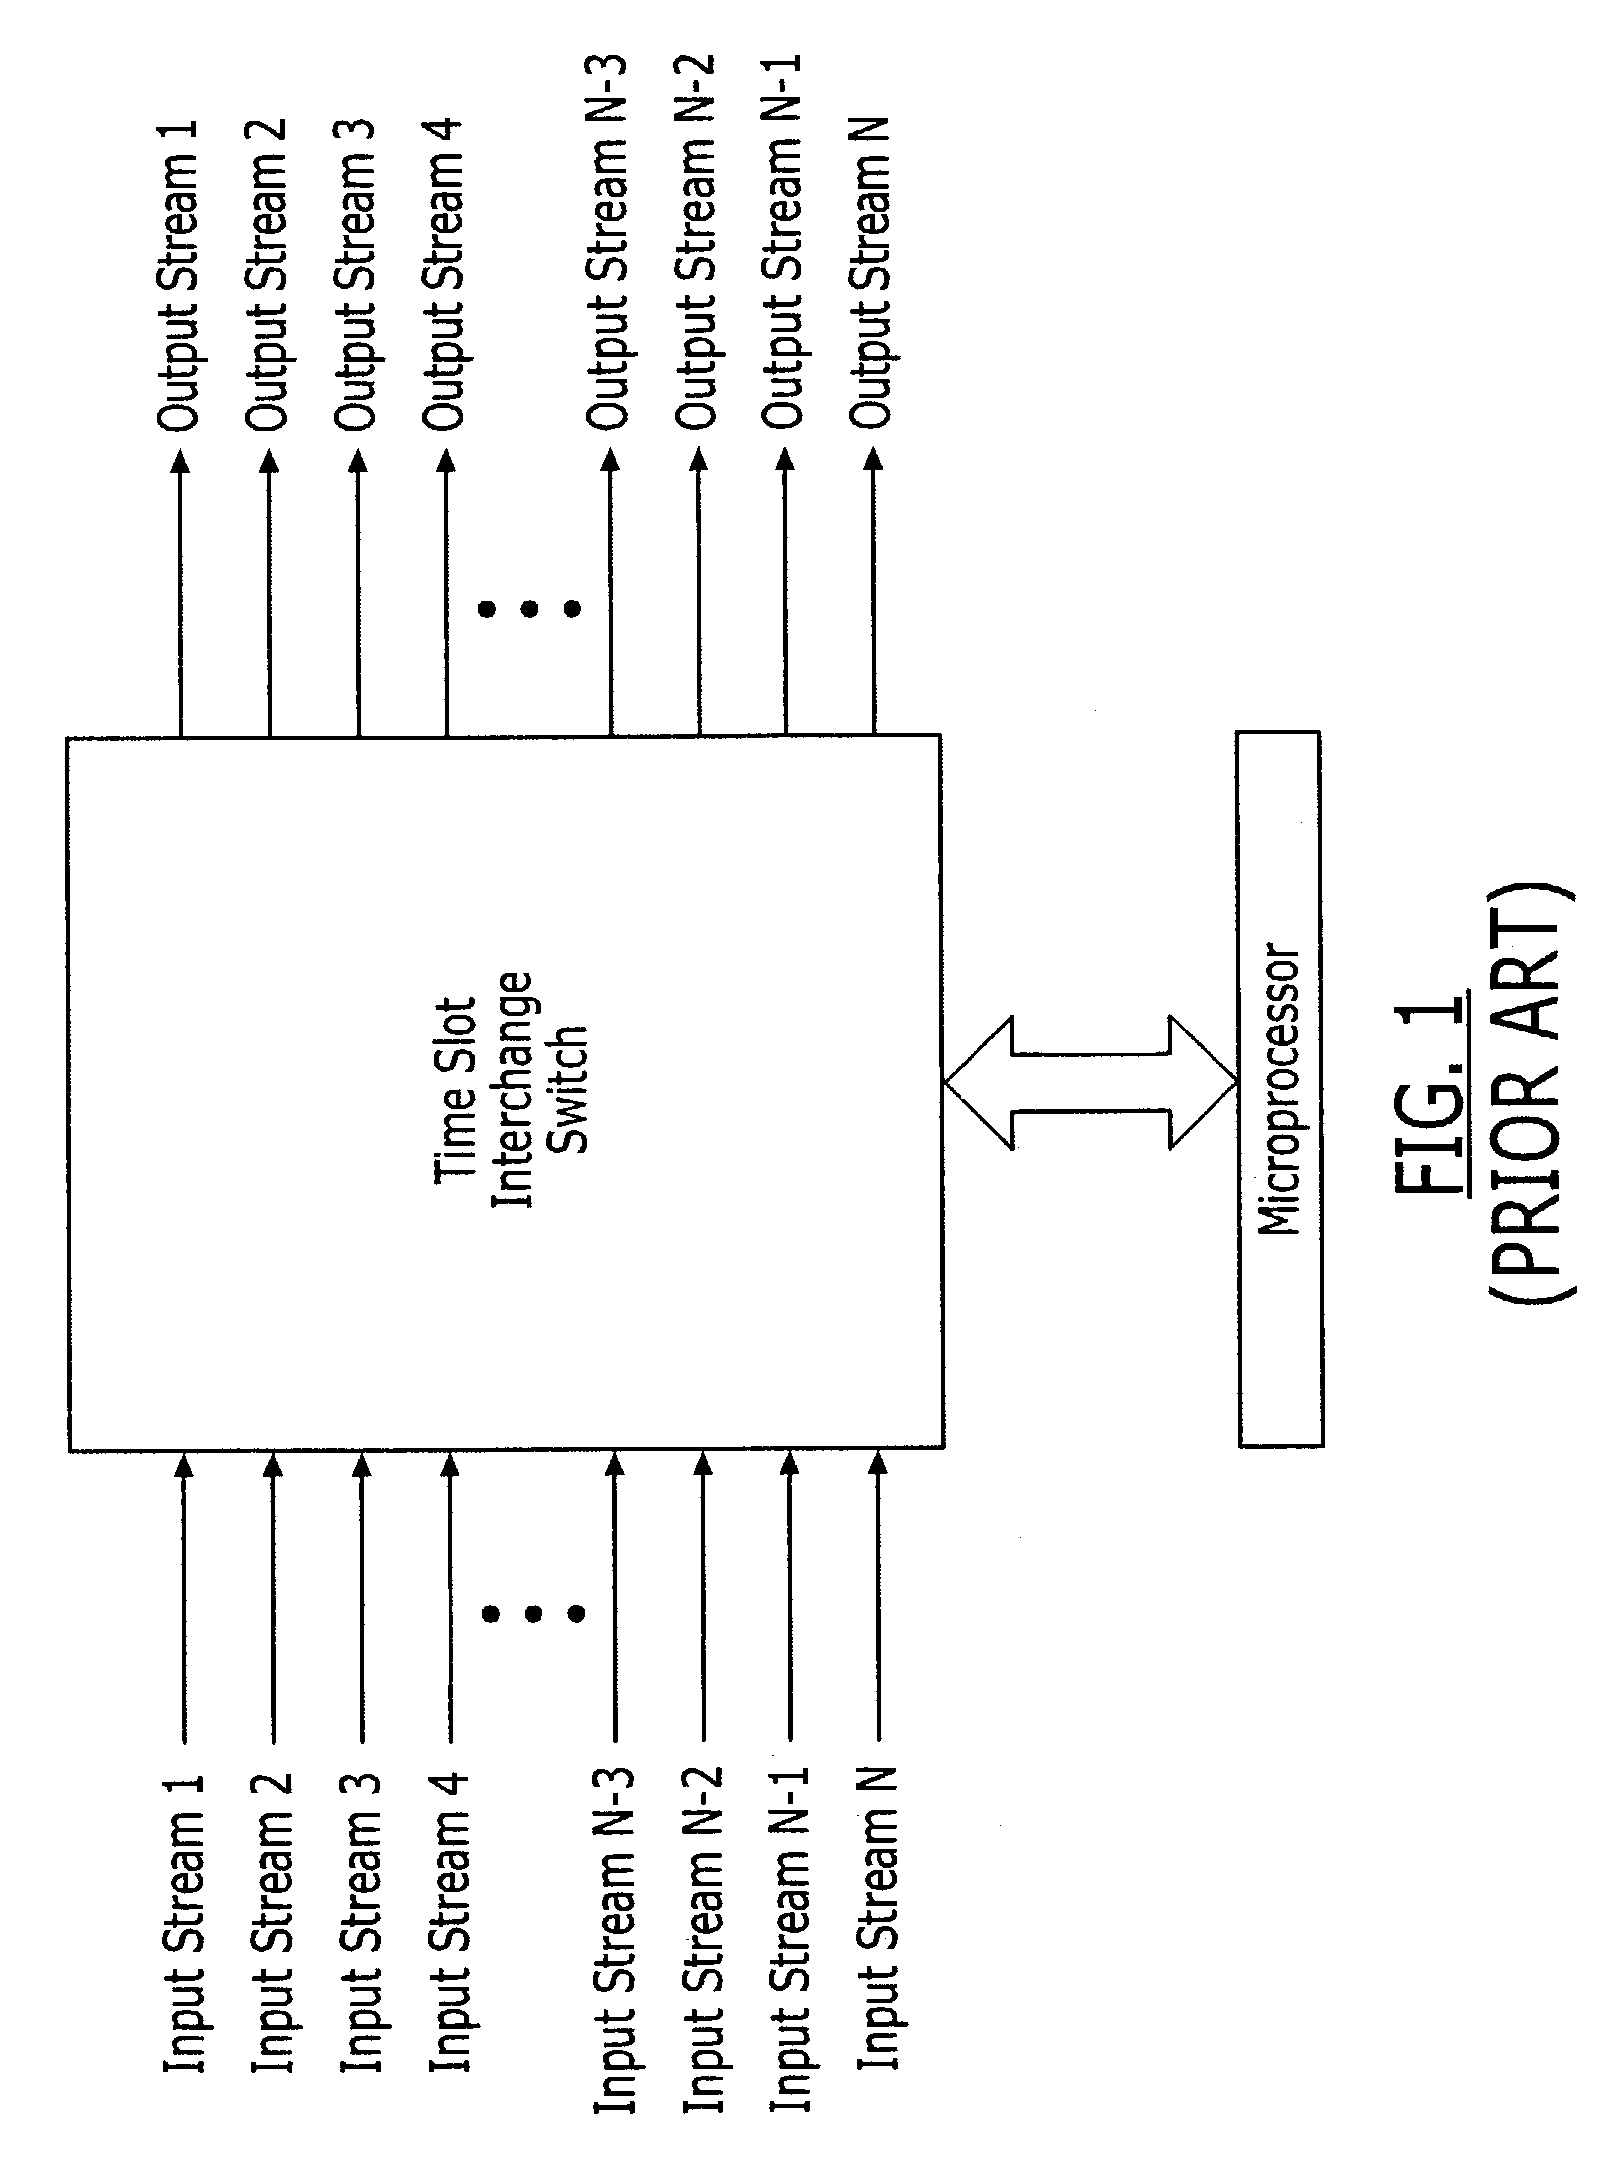 Time-slot interchange switches having efficient block programming and on-chip bypass capabilities and methods of operating same